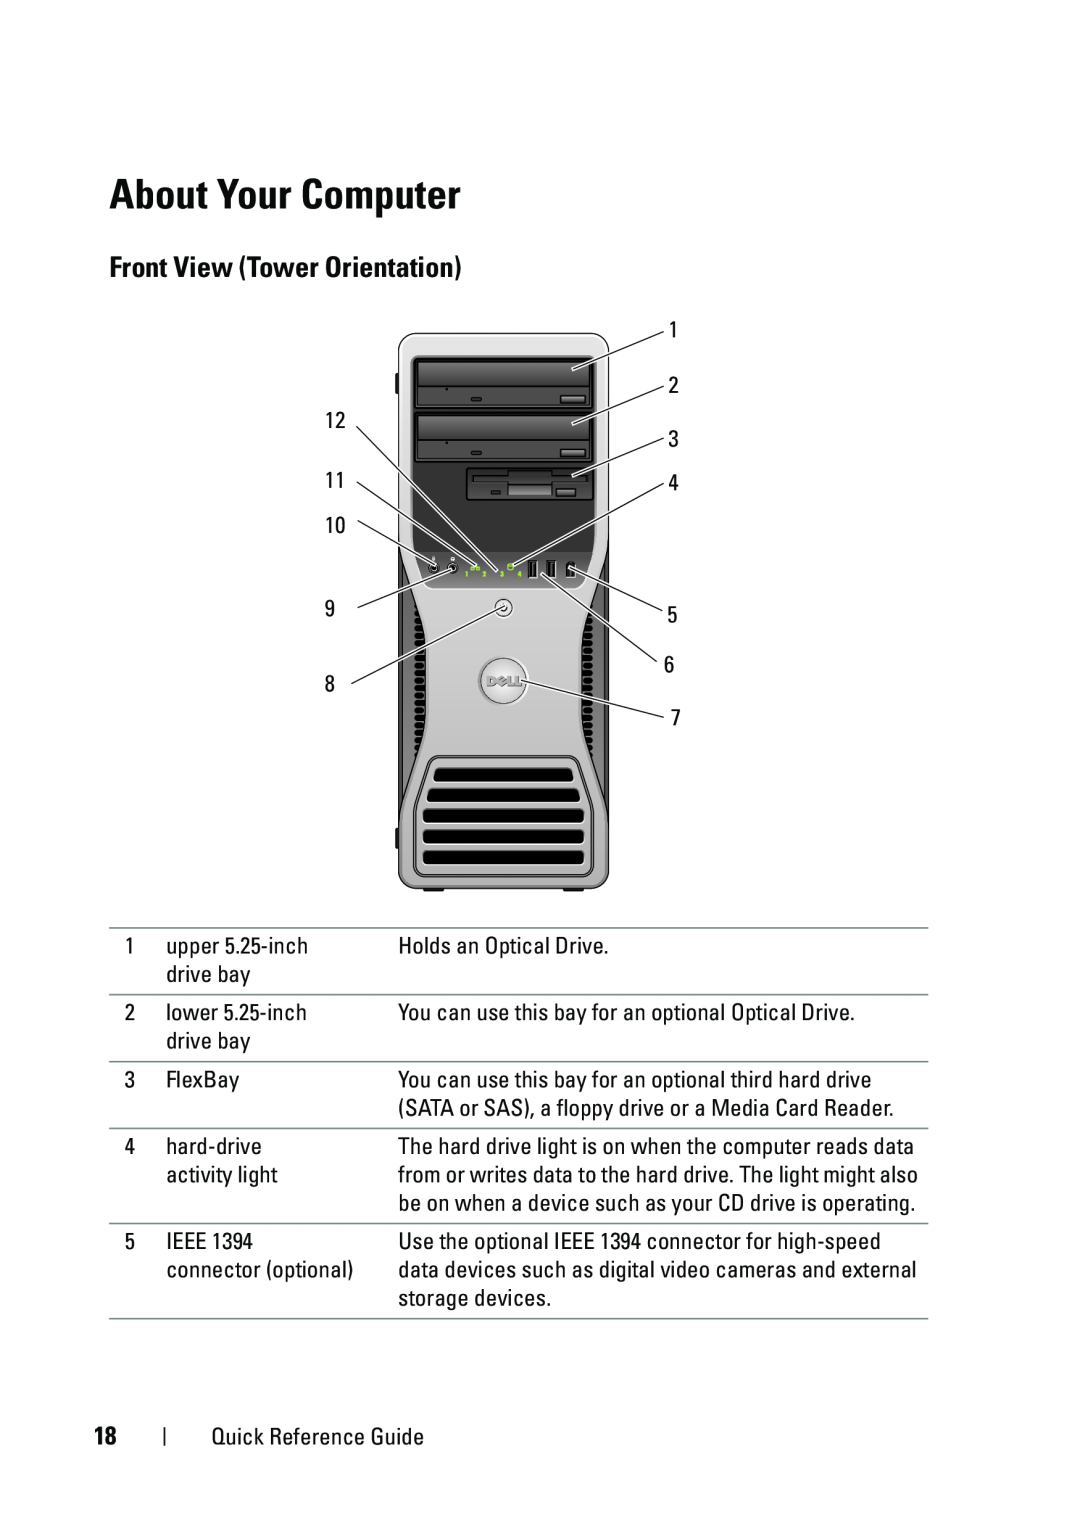 Dell T5400 manual About Your Computer, Front View Tower Orientation 